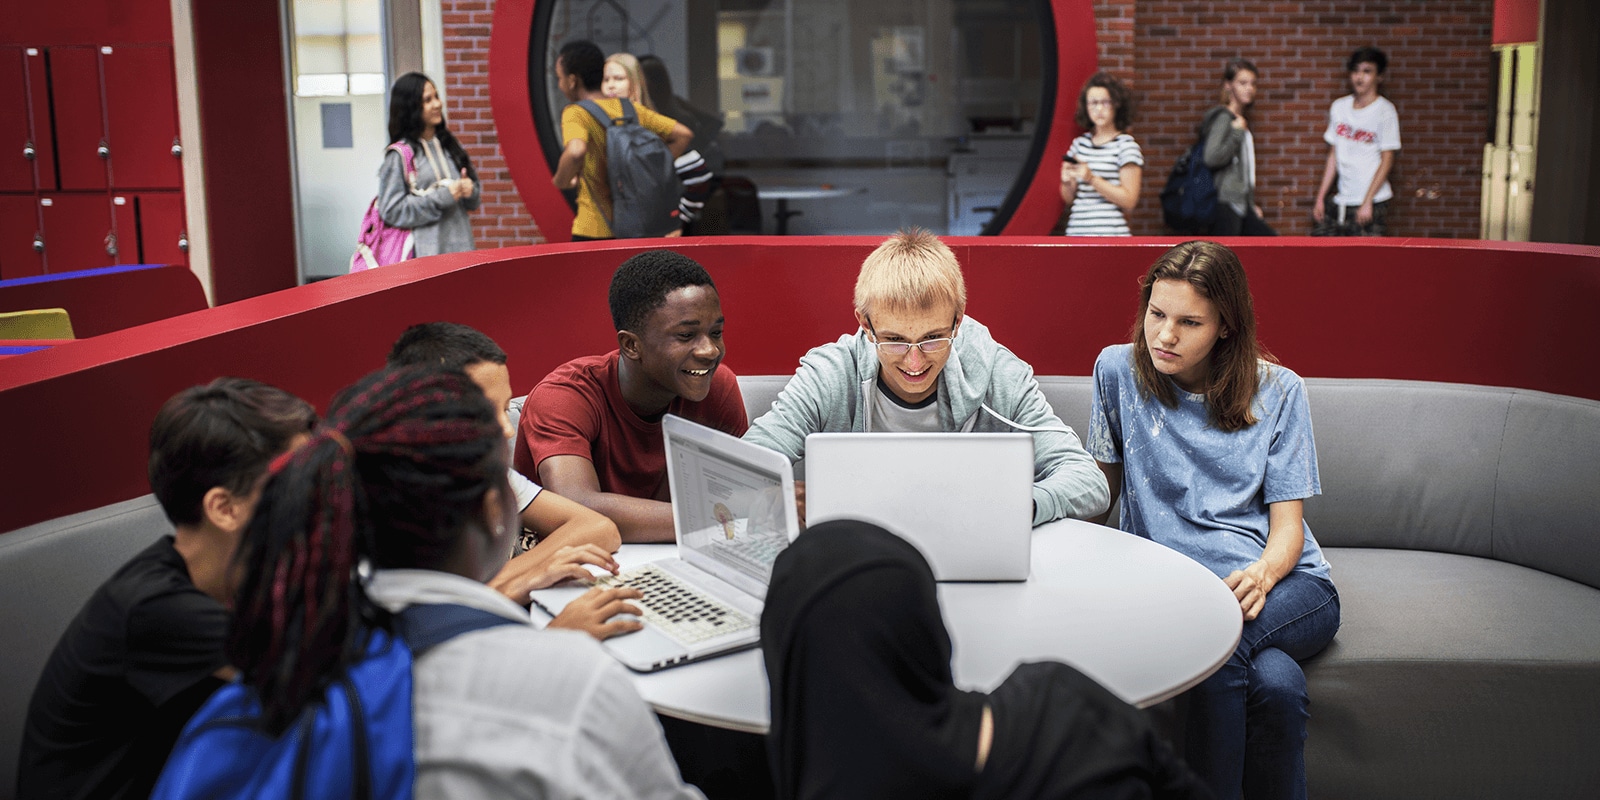 Image of students sitting at a table using laptop computers